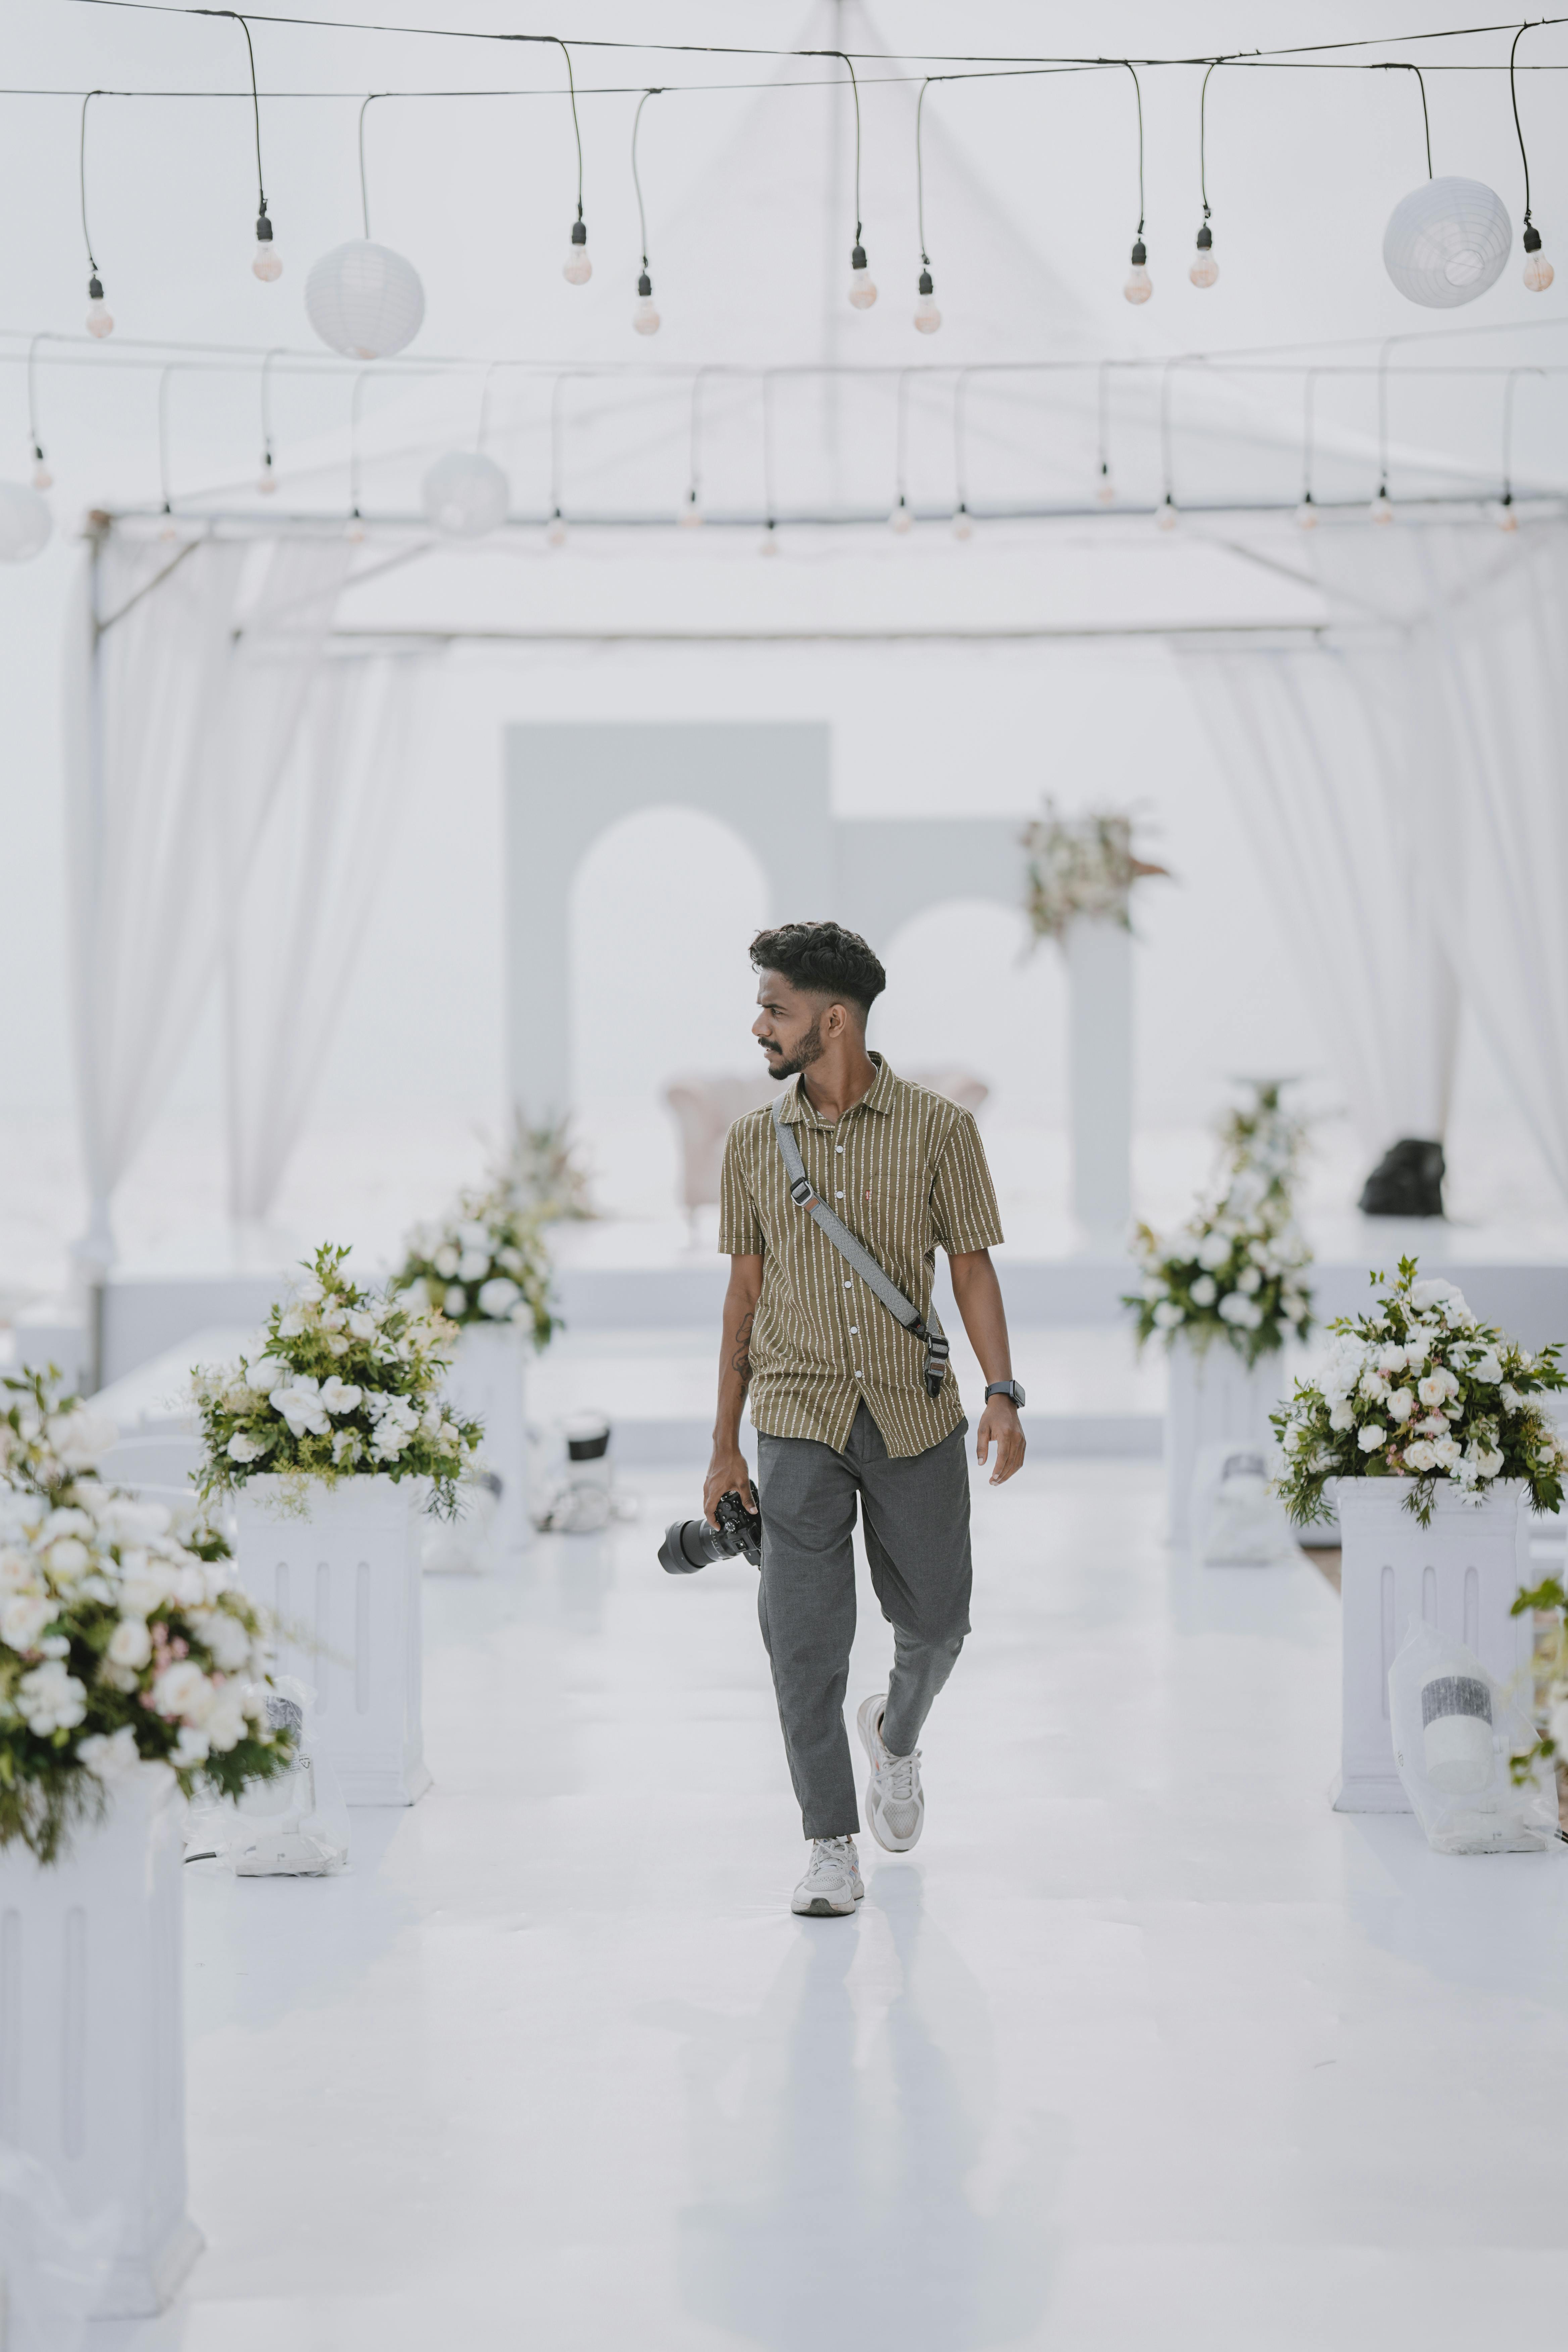 Exploring the Latest Trends in Wedding Videography